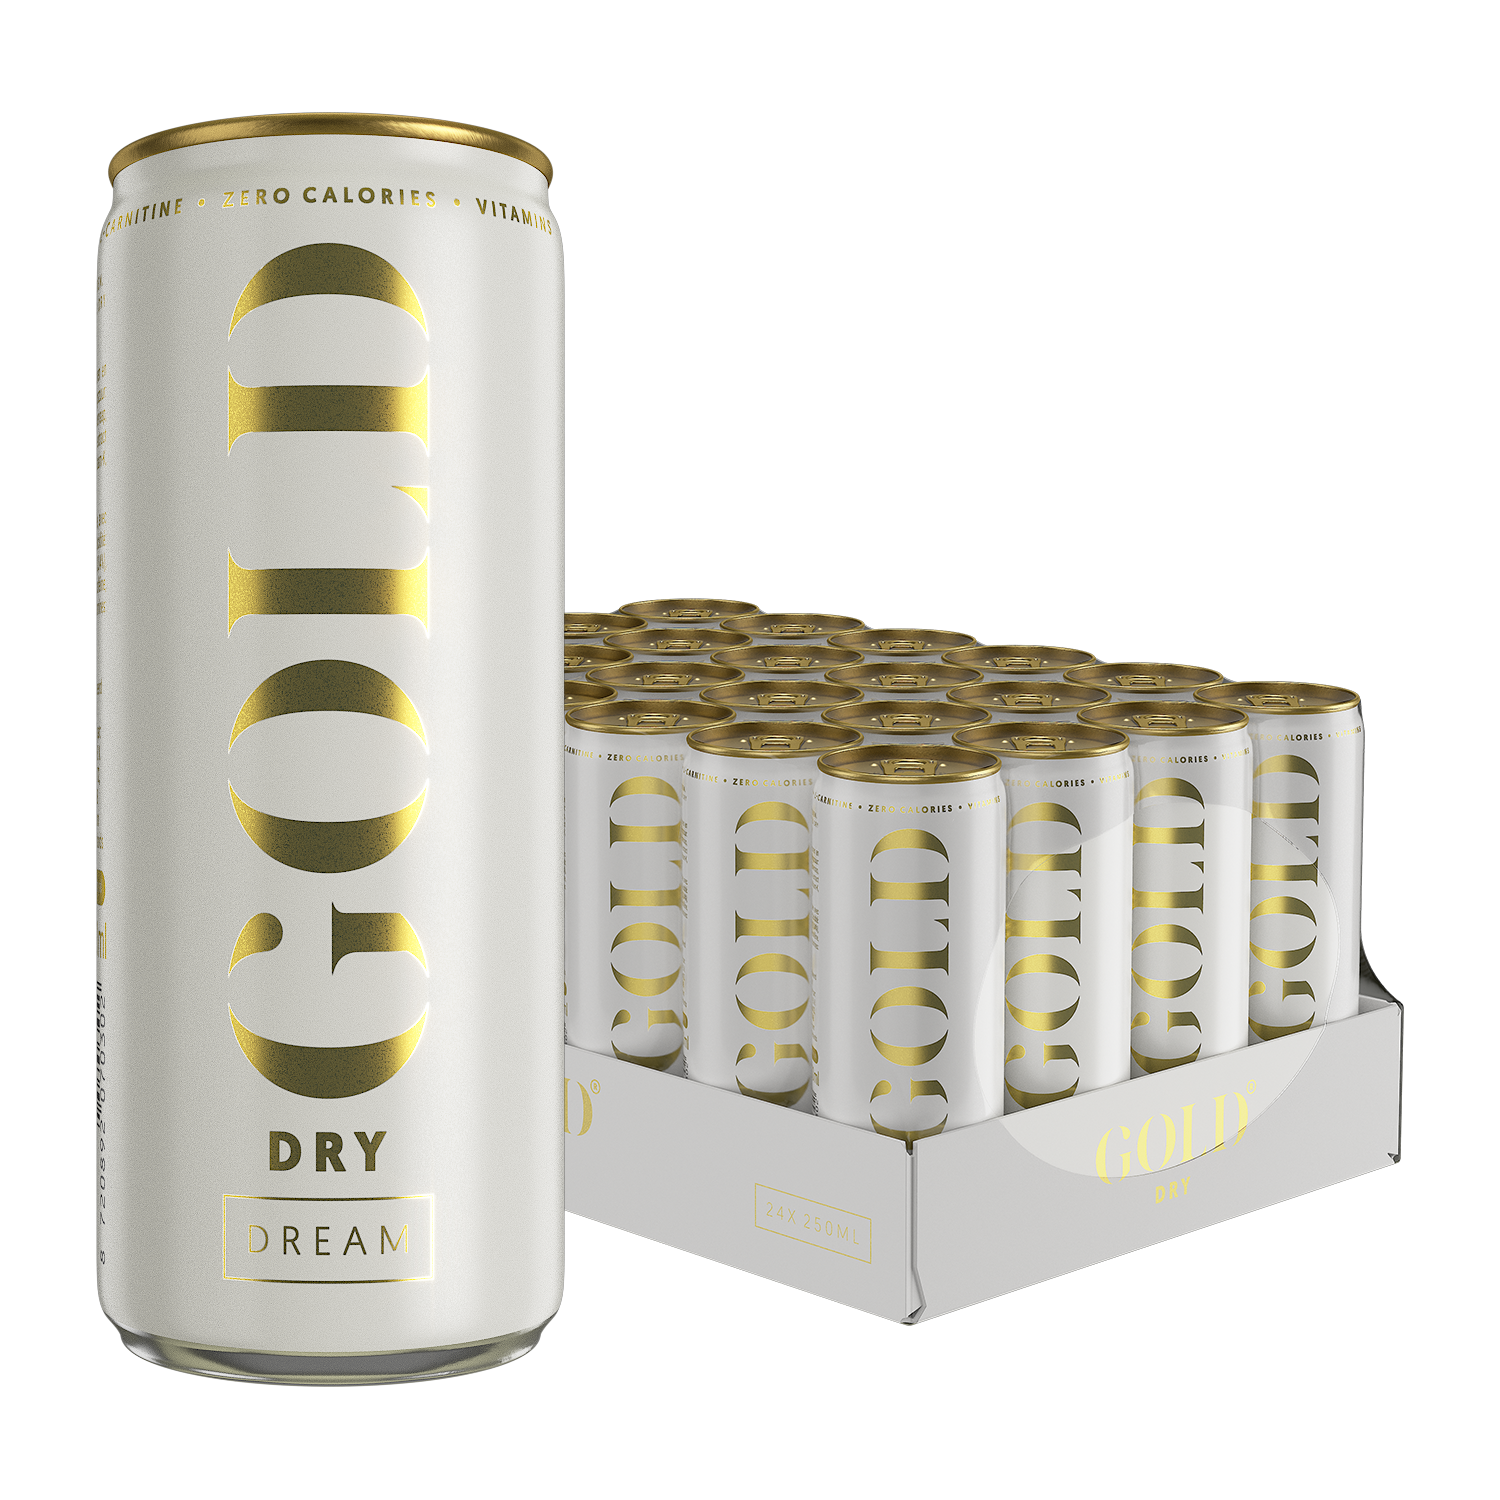 Gold Dry (12/24-Pack)